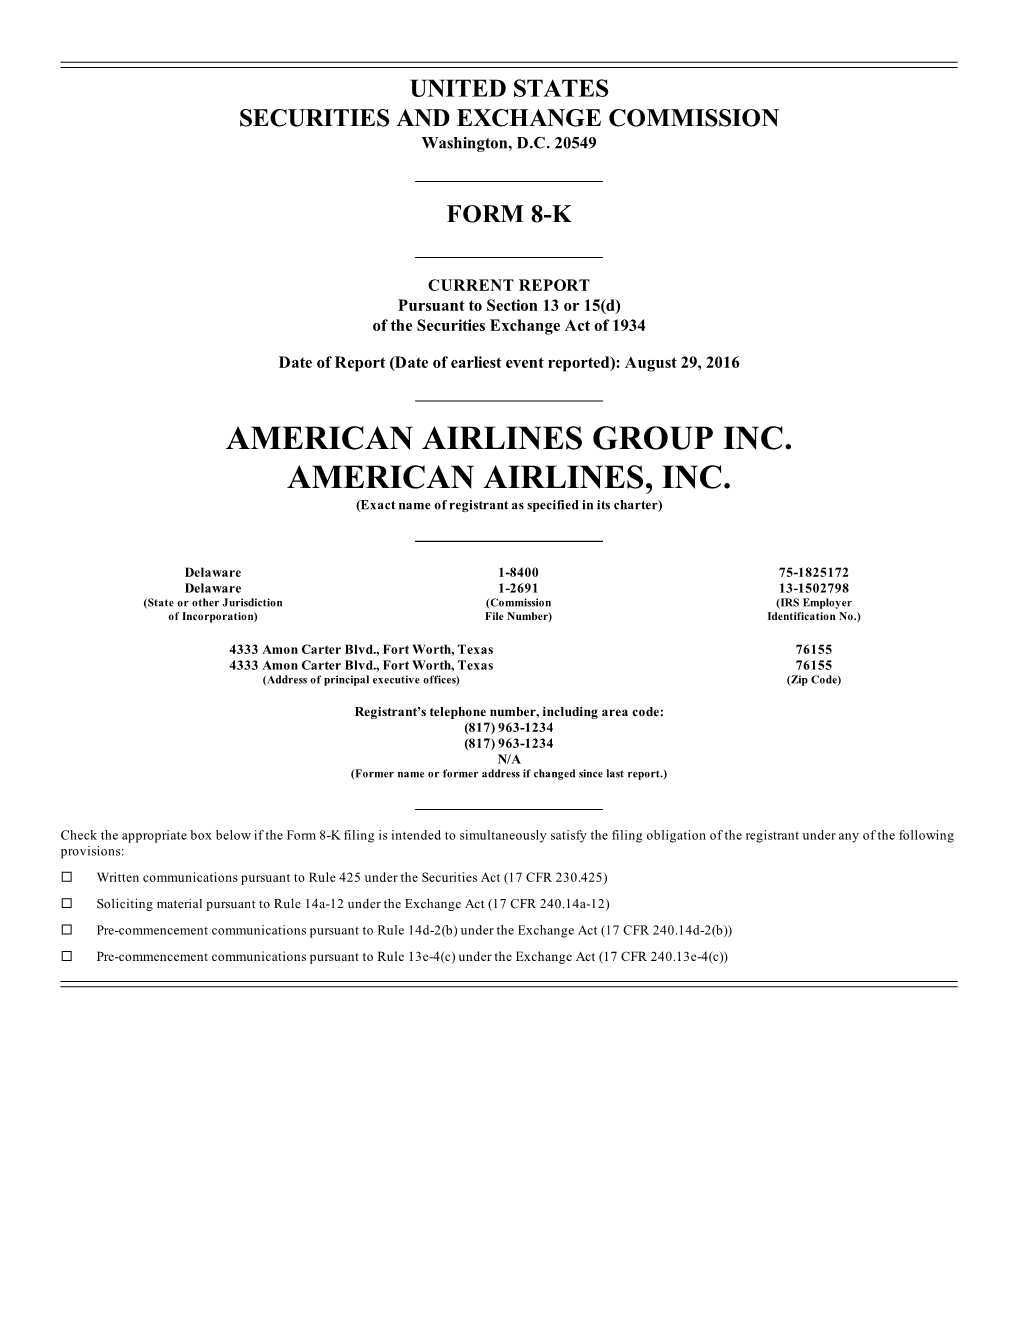 AMERICAN AIRLINES GROUP INC. AMERICAN AIRLINES, INC. (Exact Name of Registrant As Specified in Its Charter)